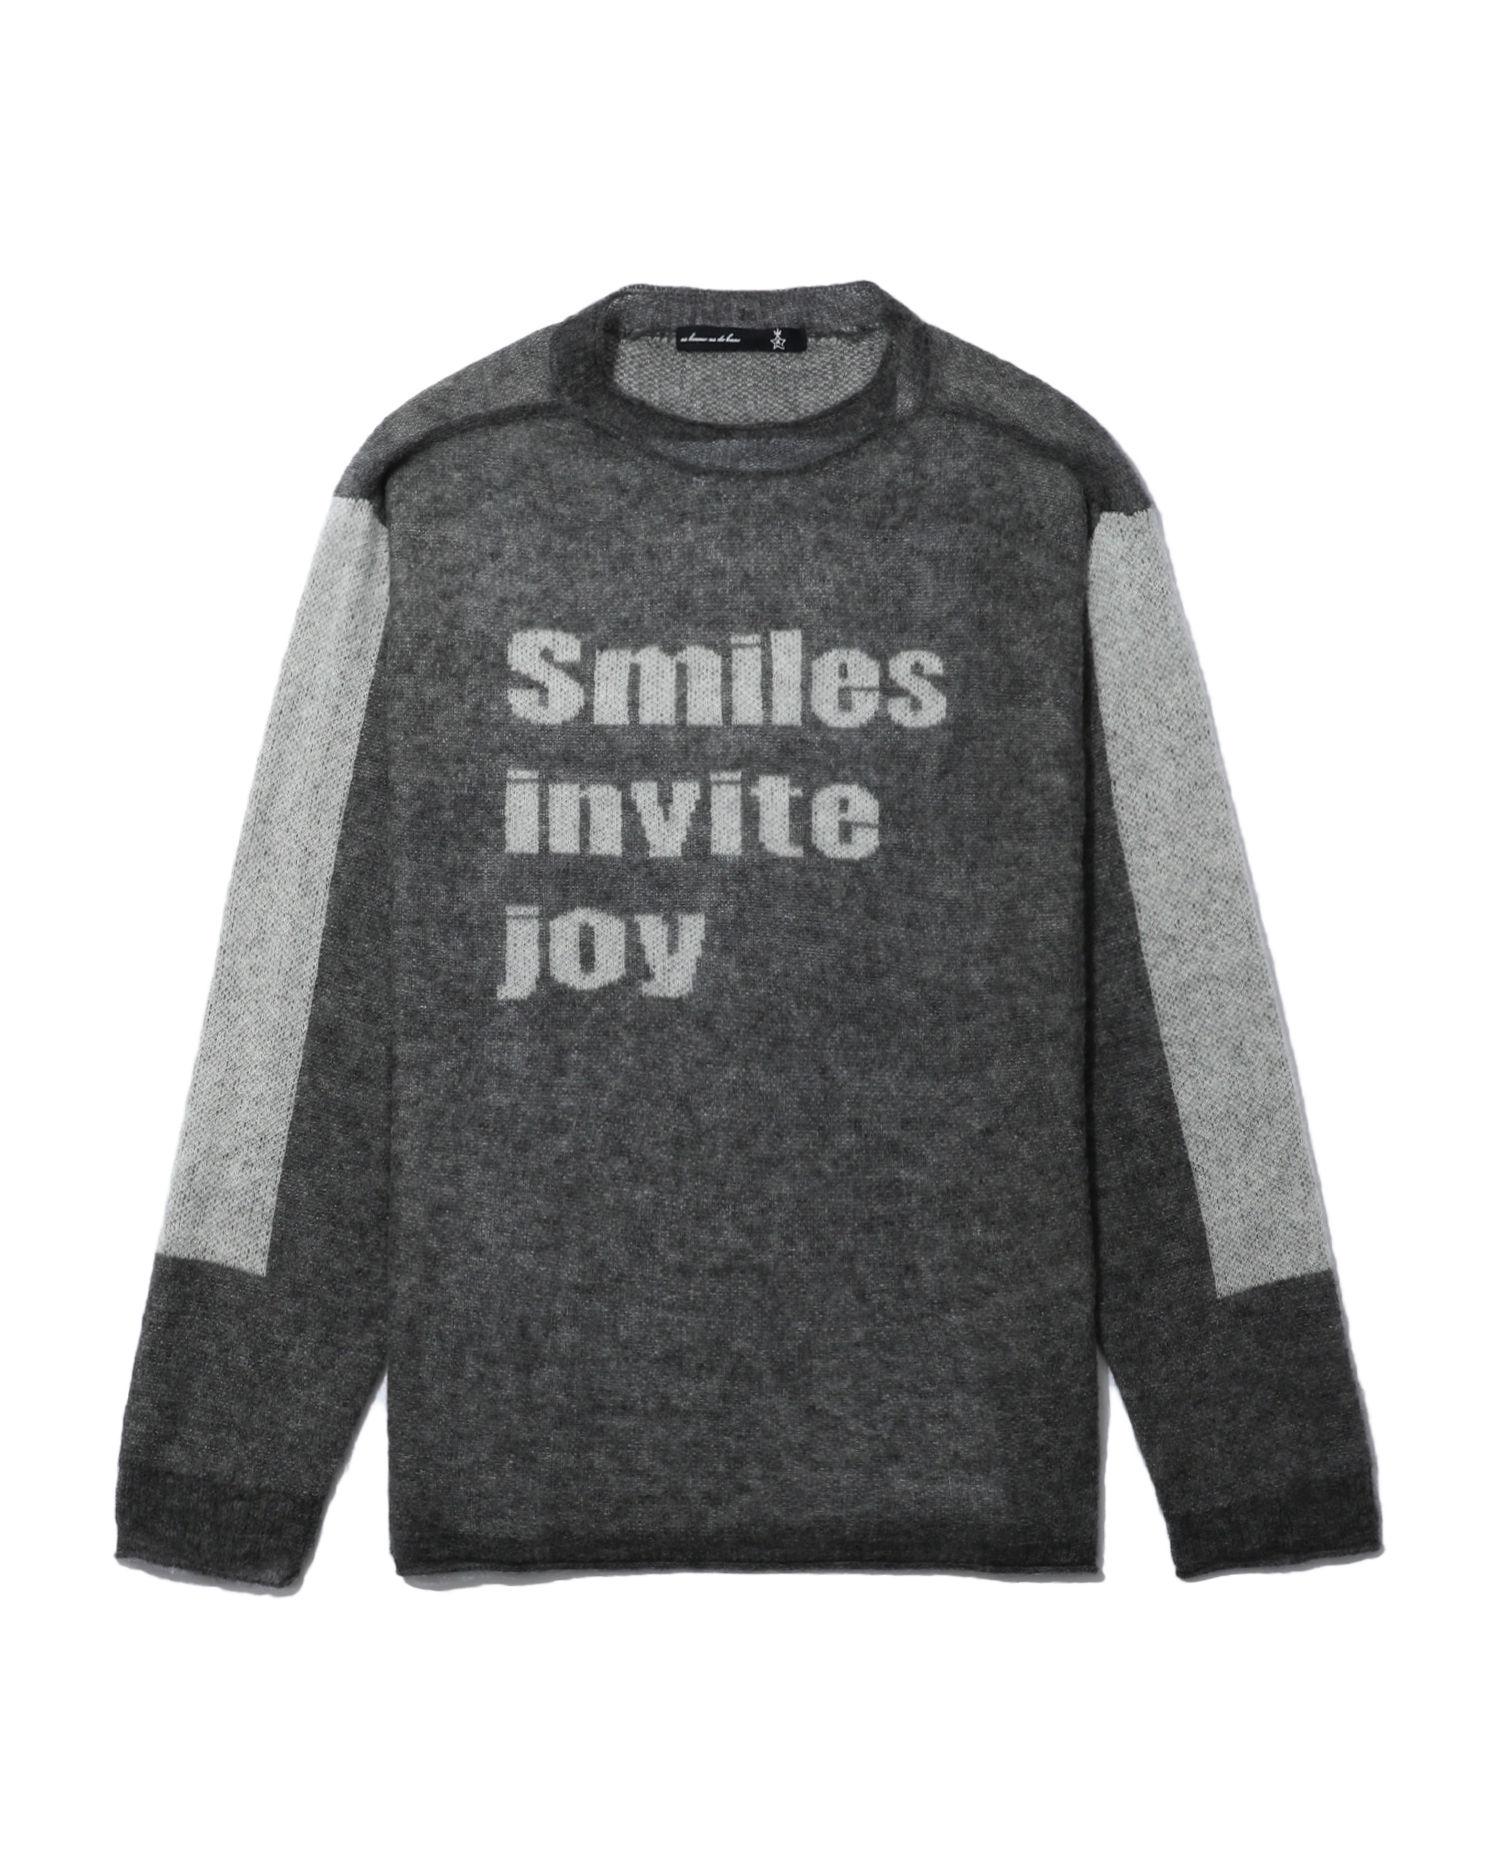 Smiles invite Joy sweater by AS KNOW AS